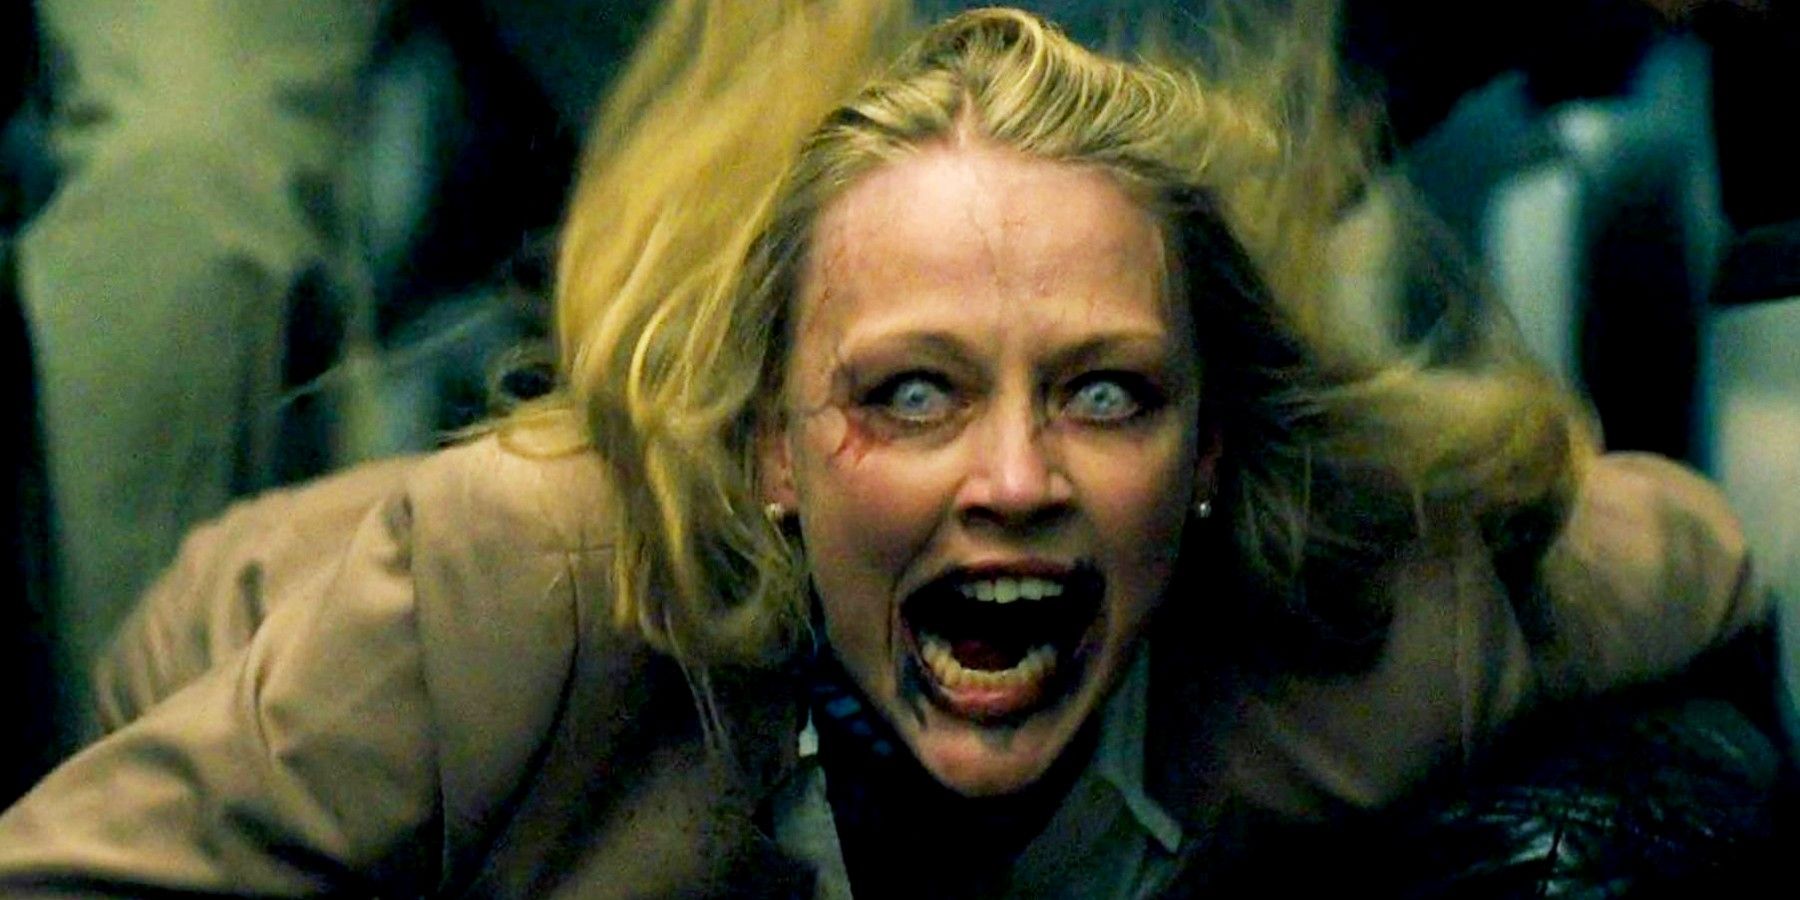 Woman zombie screaming with mouth wide open in World War Z